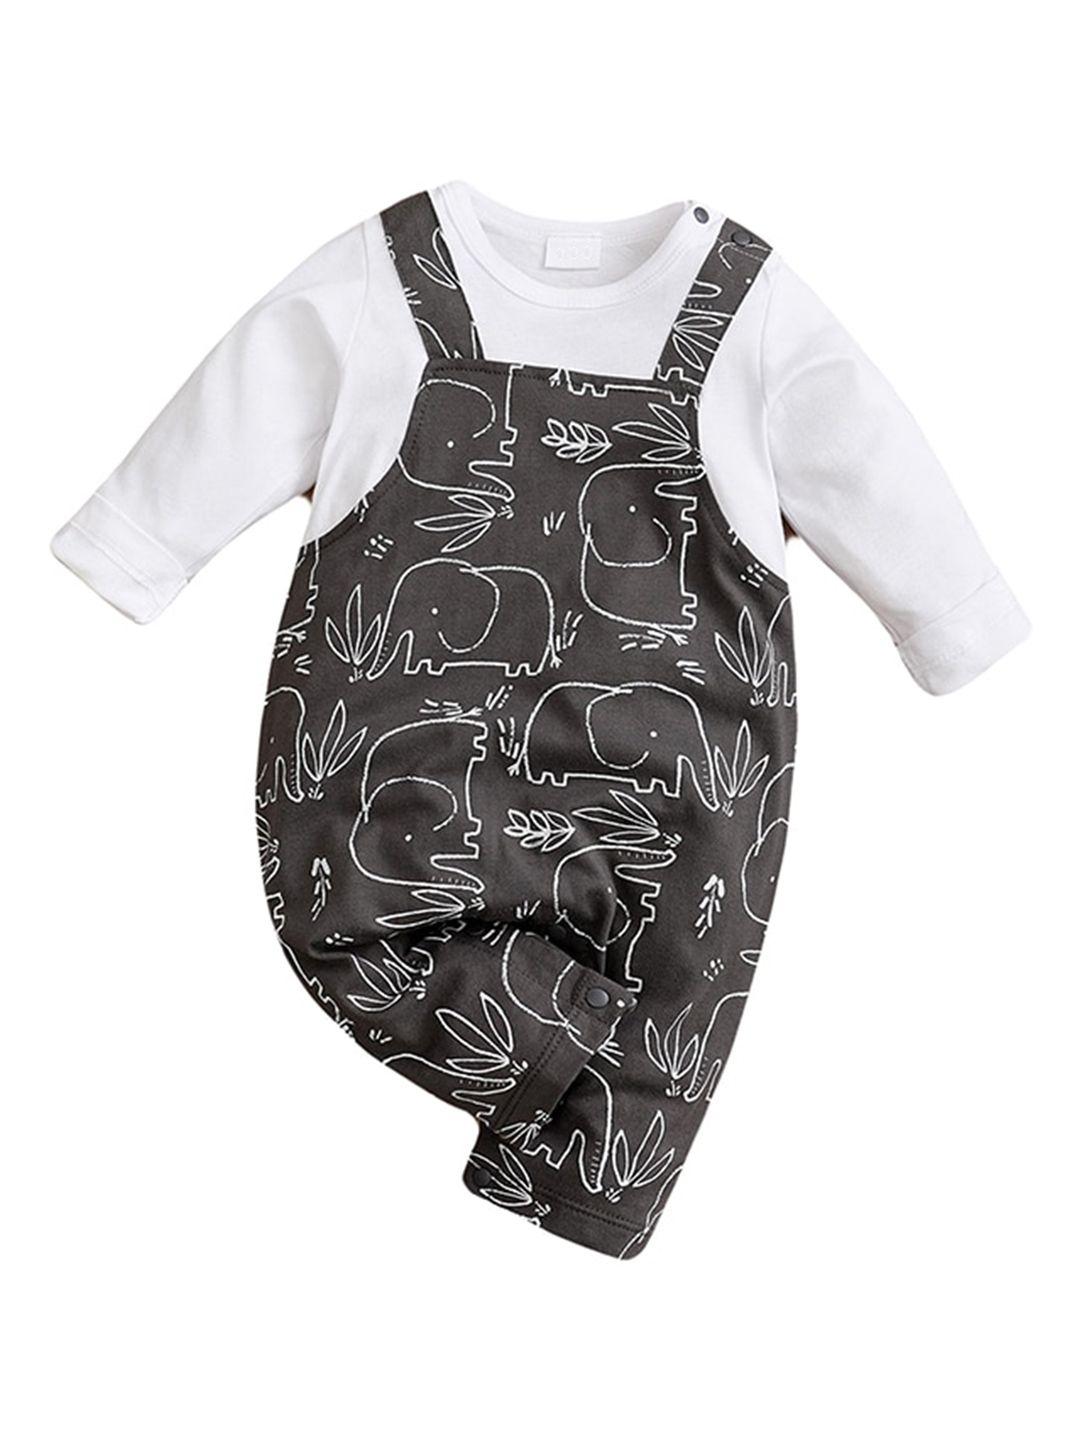 stylecast infant boys black & white printed cotton rompers